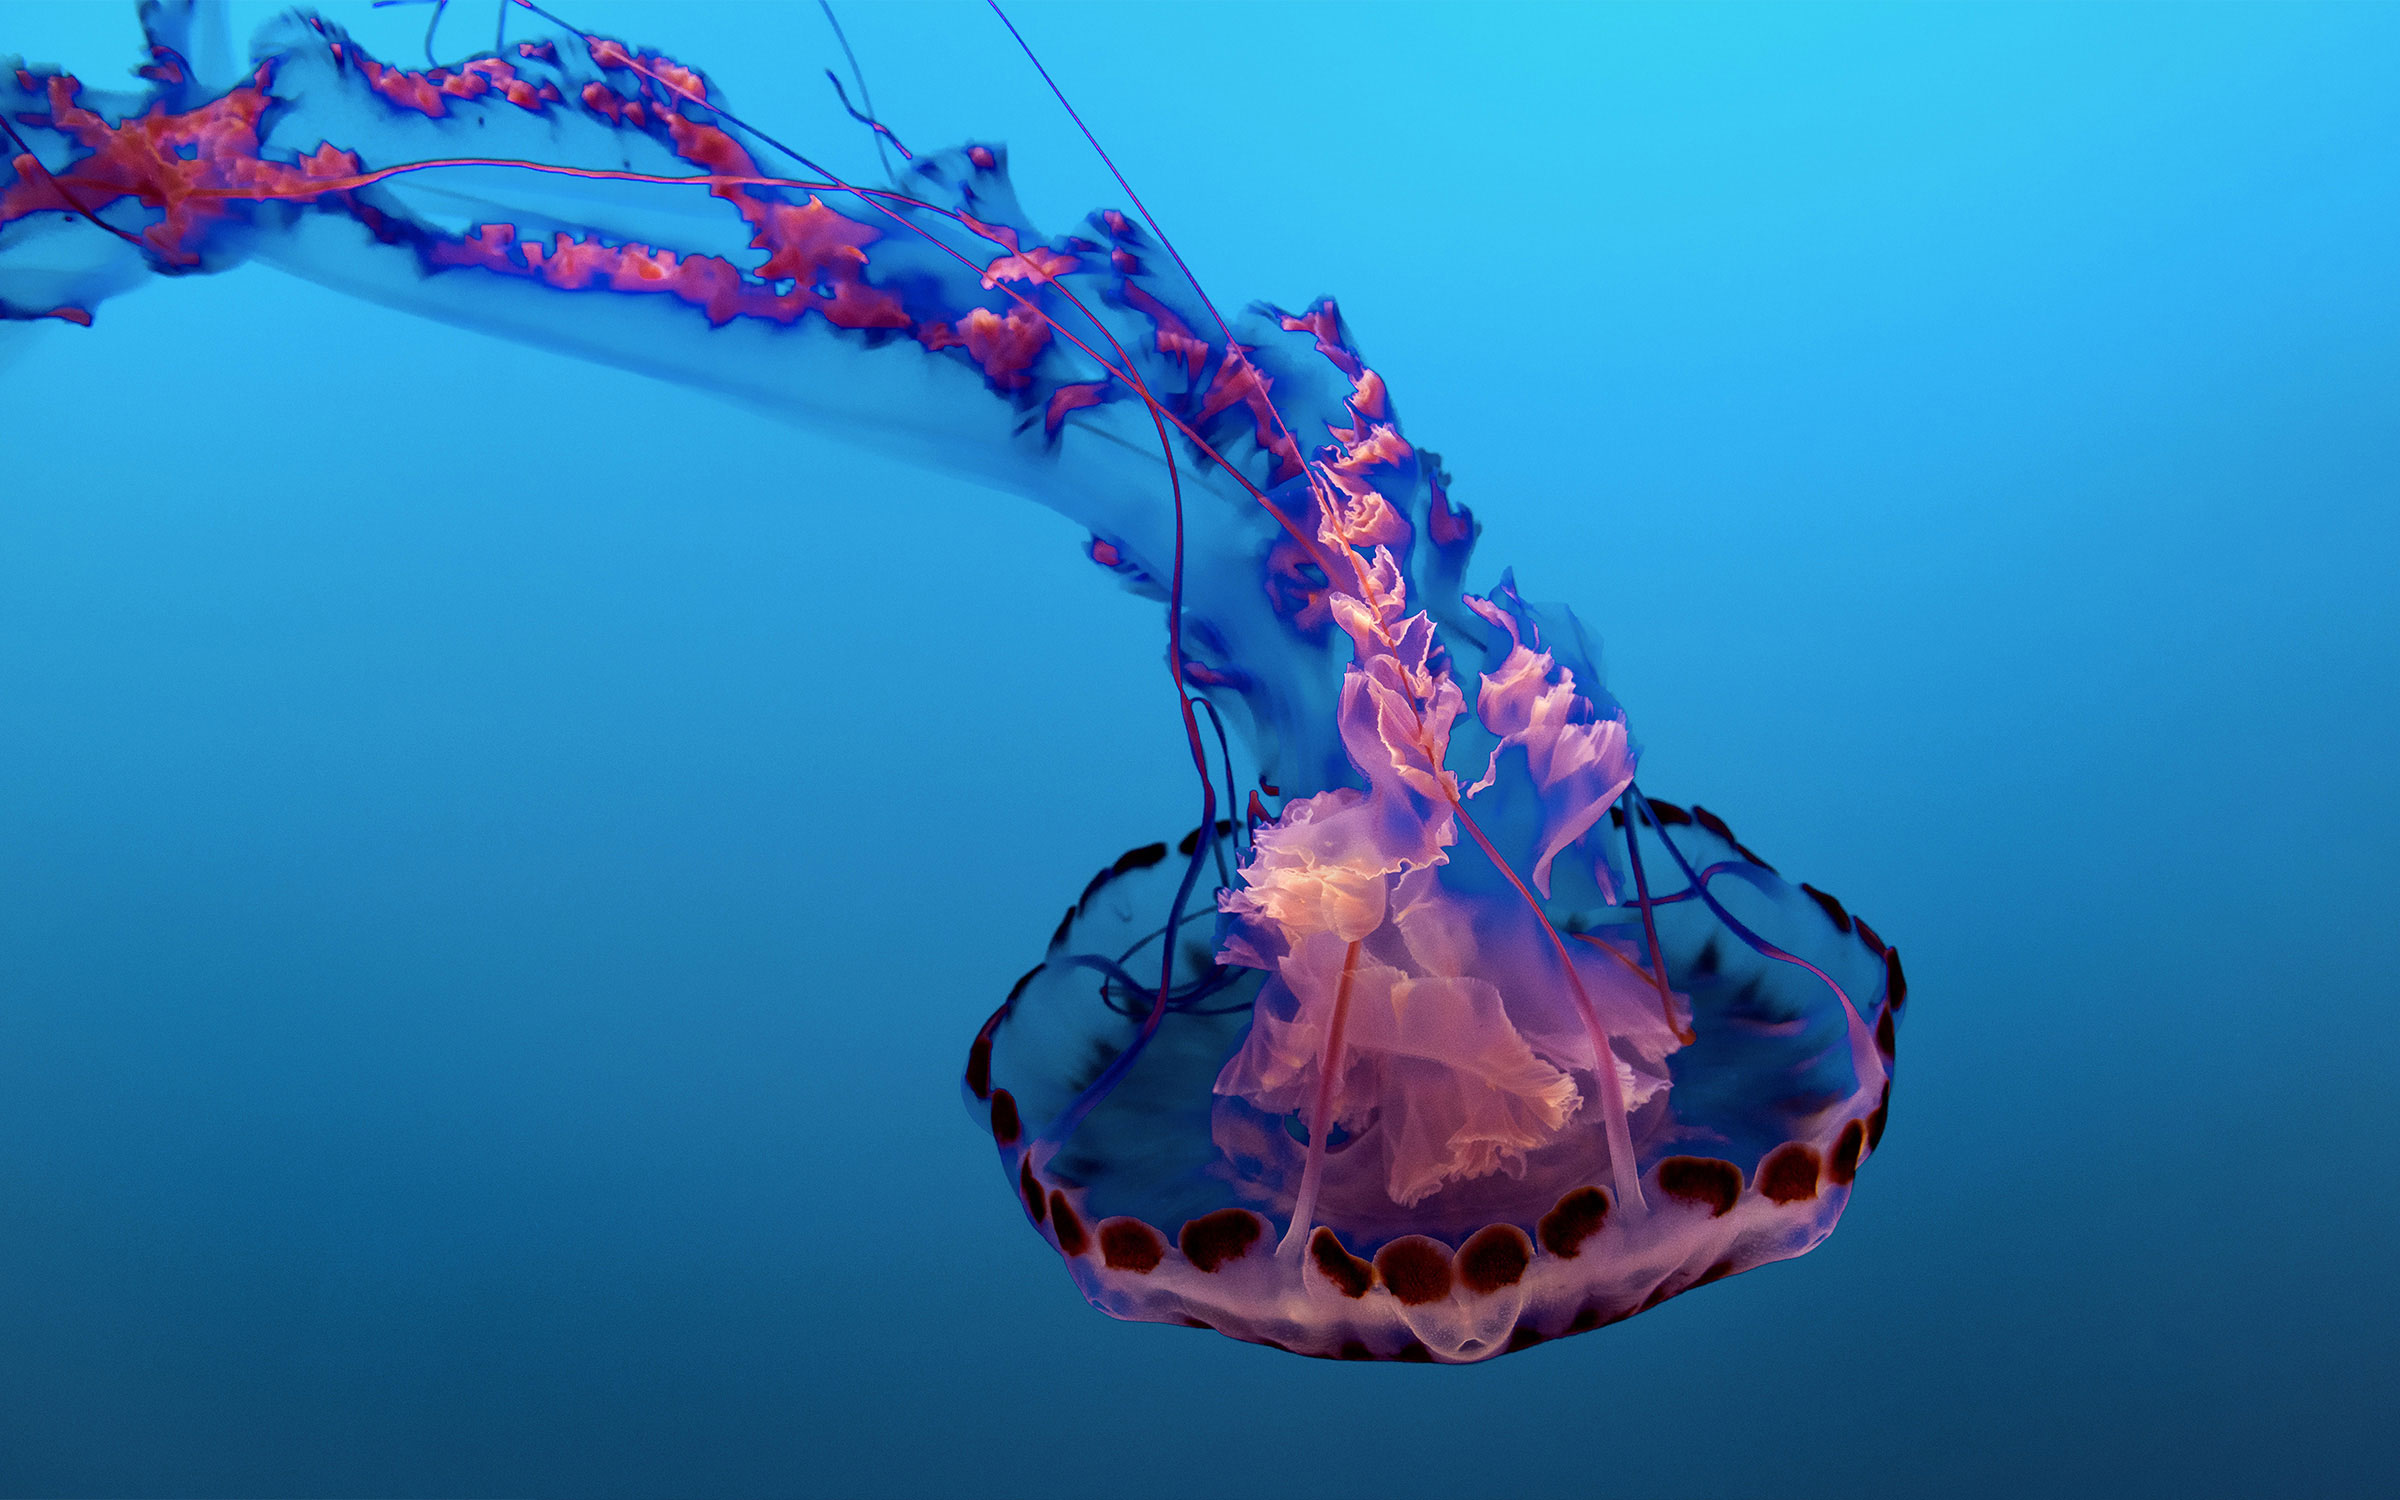 https://tayeblog.net/images/yootheme/science-post-what-you-should-know-about-jellyfish-season.jpg